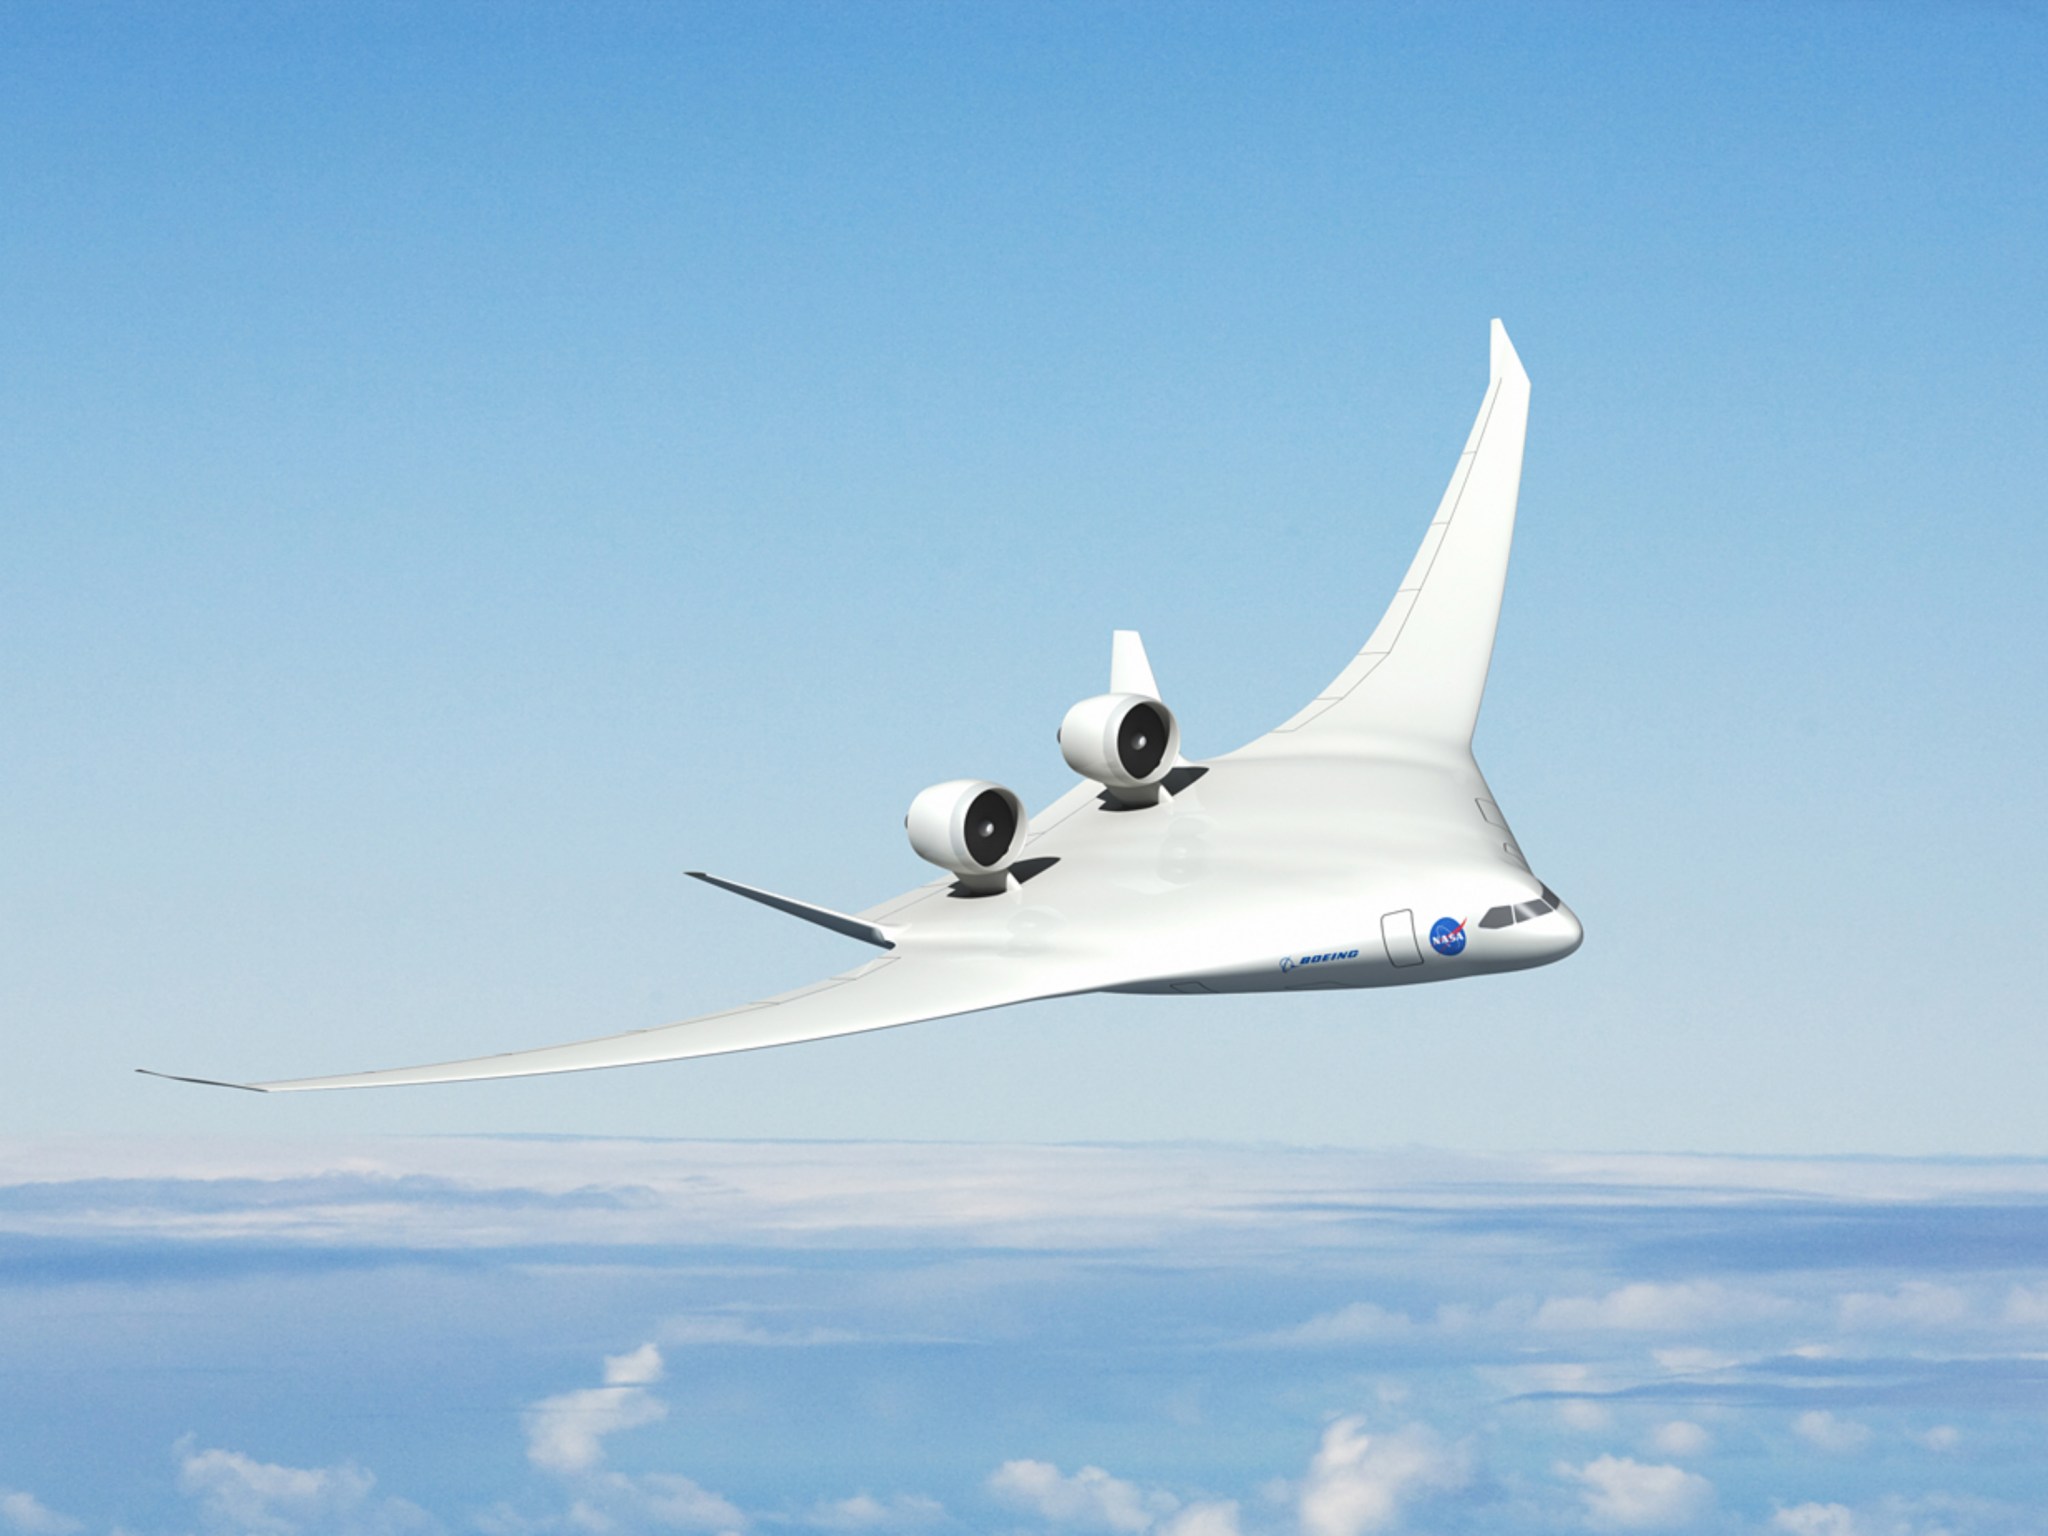 Artist concept of the BWB in flight against blue skies.